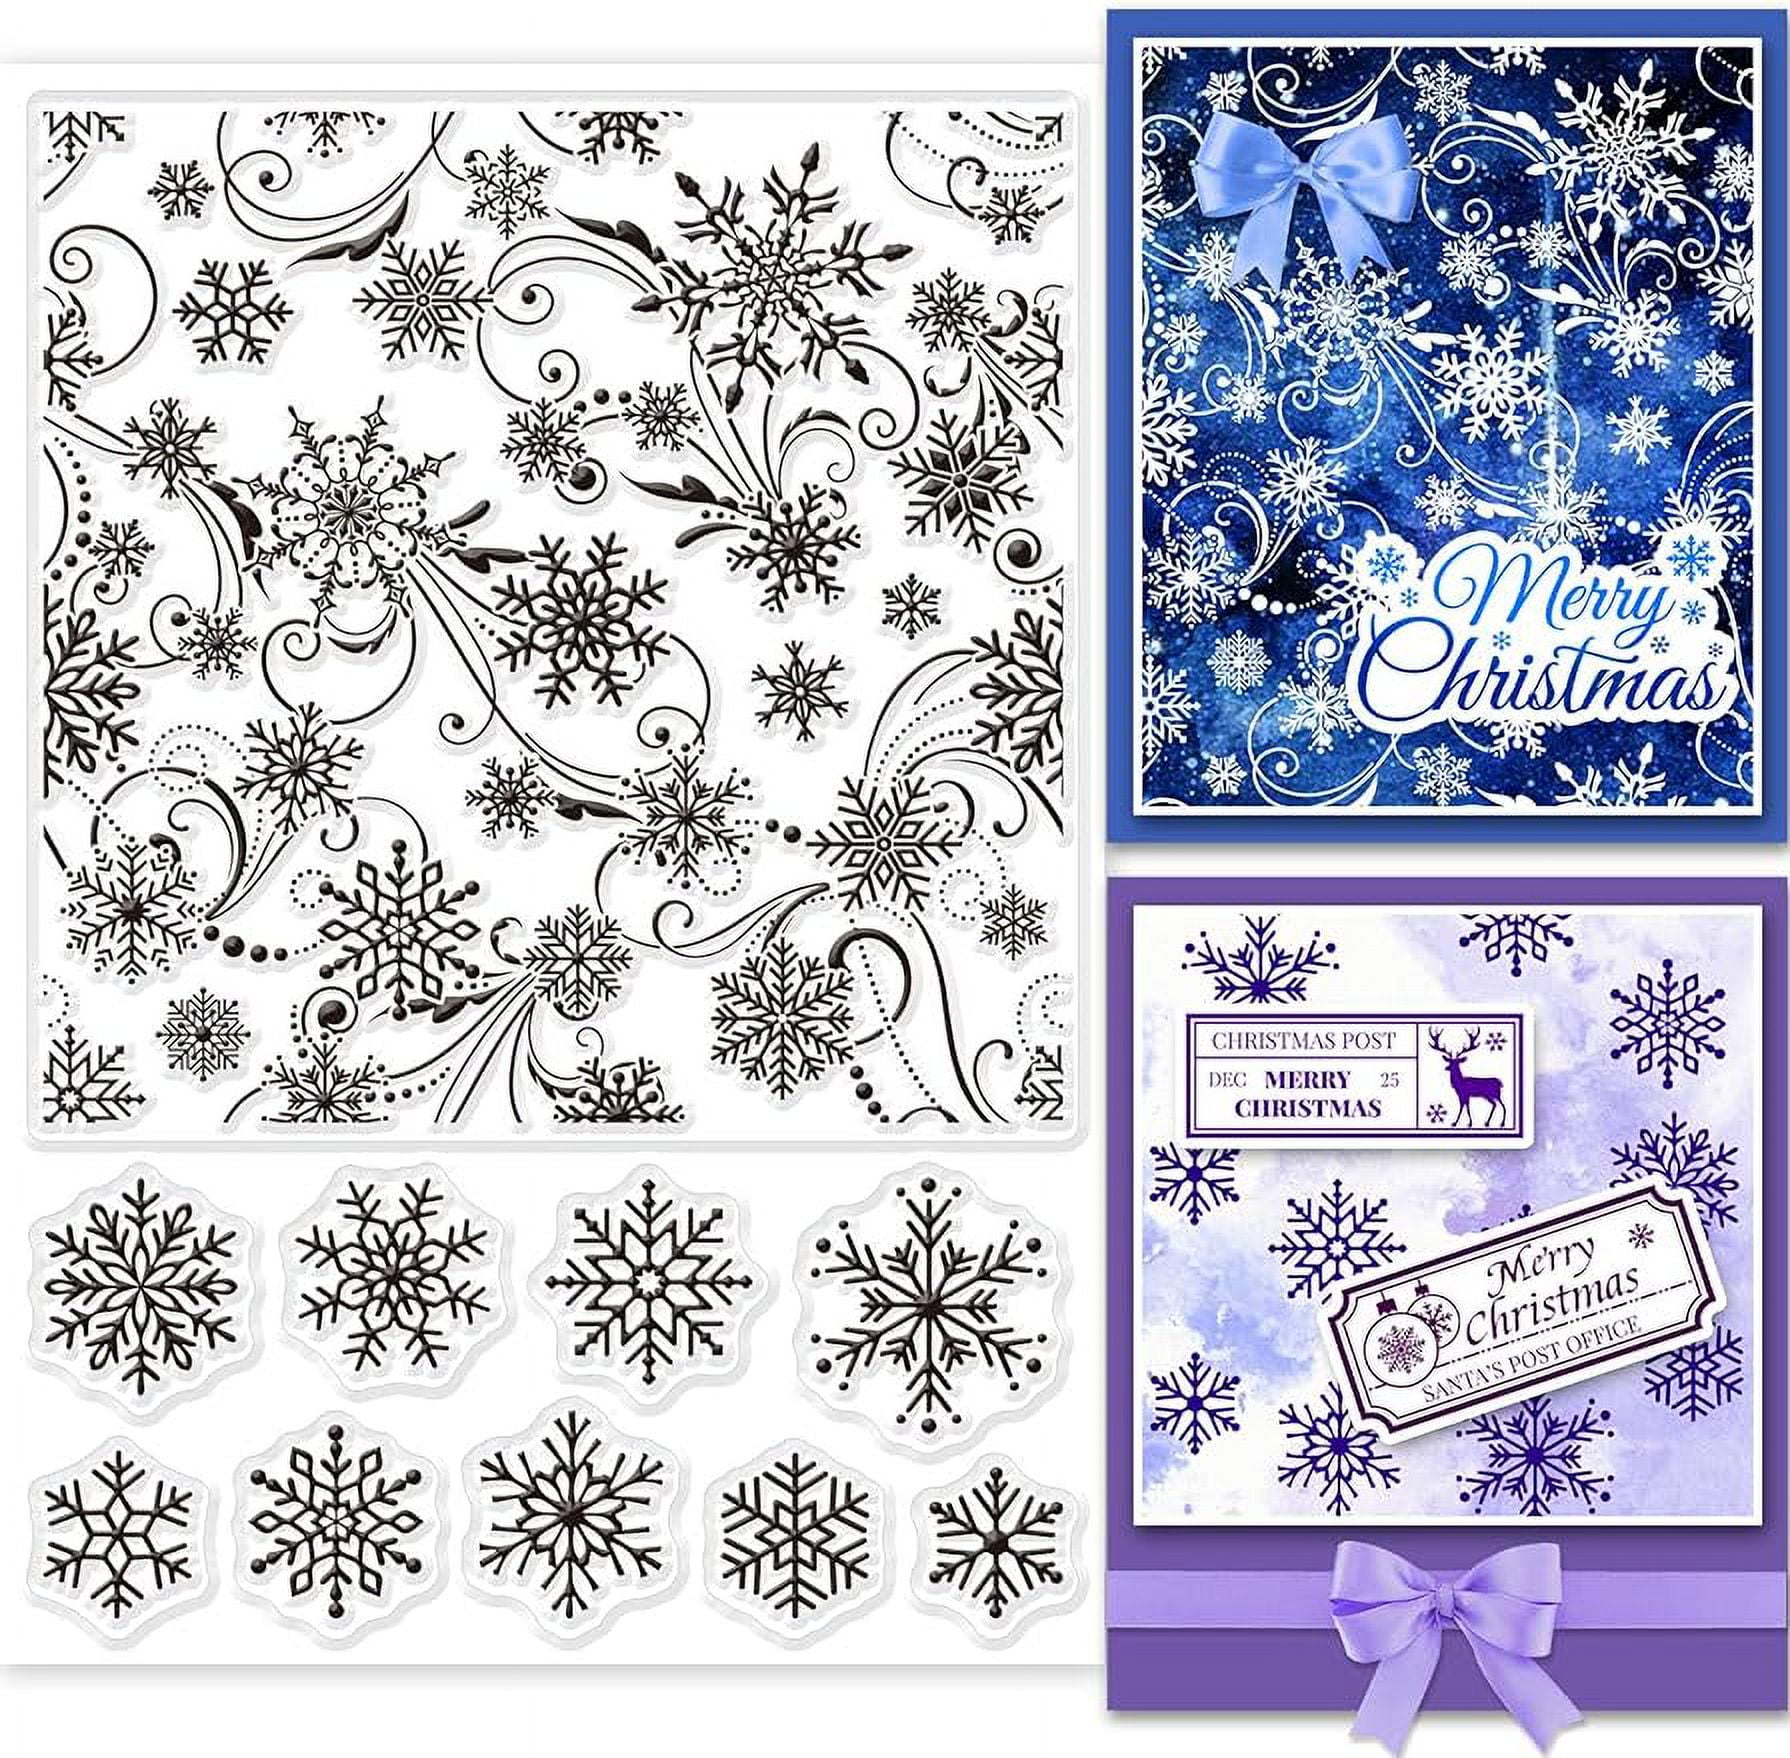 Gina K Designs - Clear Stamp - Ornamental Snowflakes